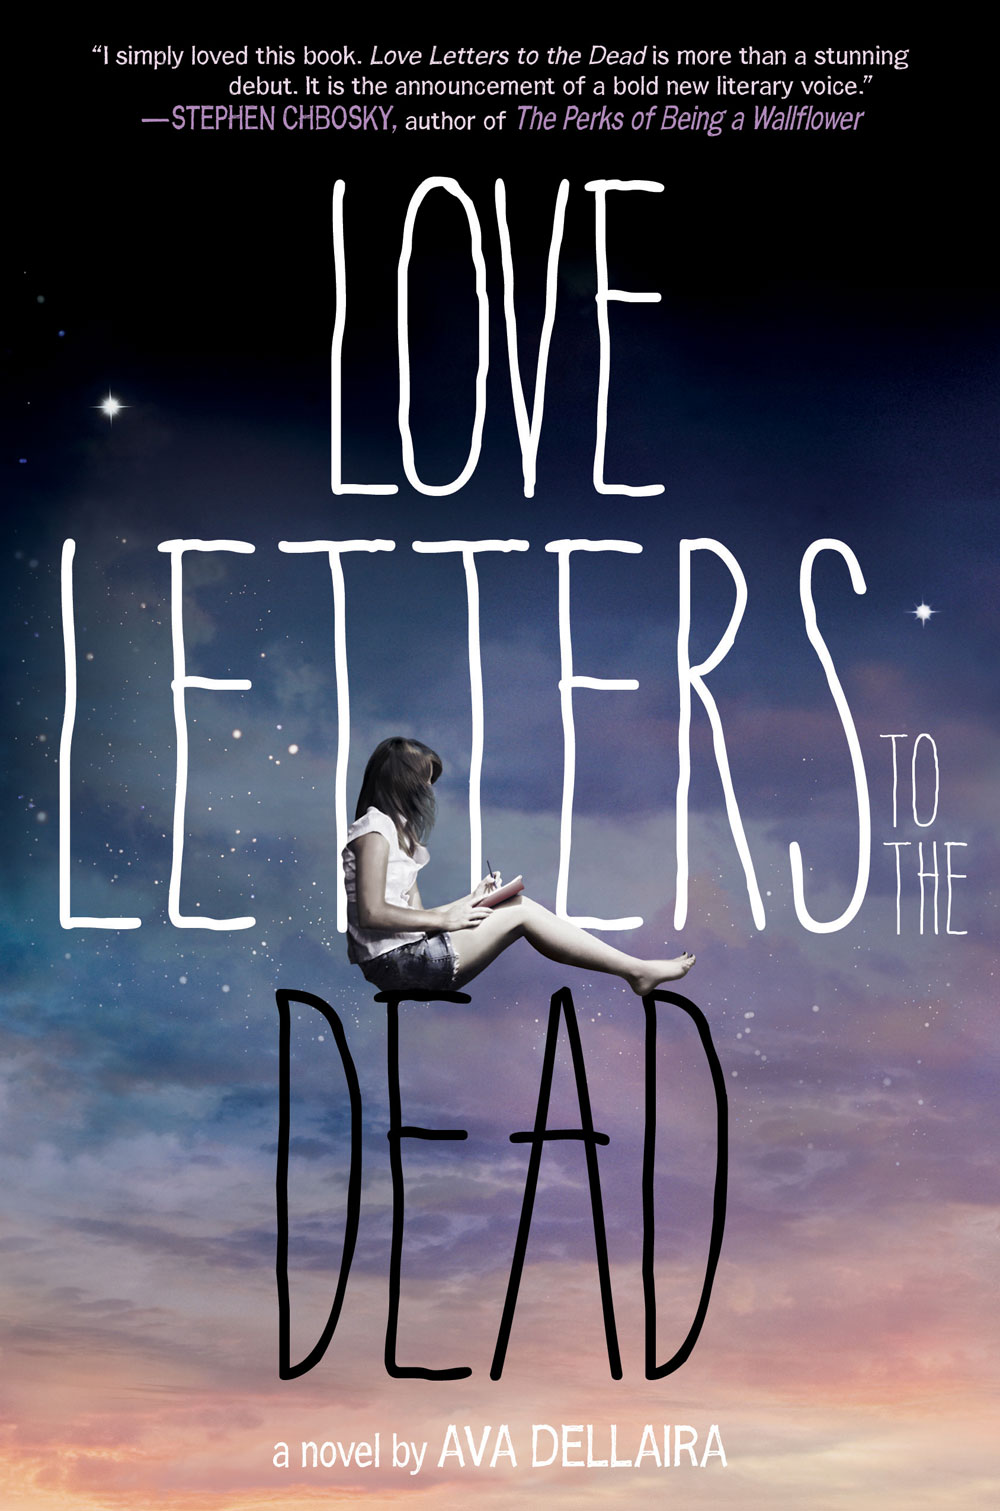 Love-Letters-To-The-Dead-novel